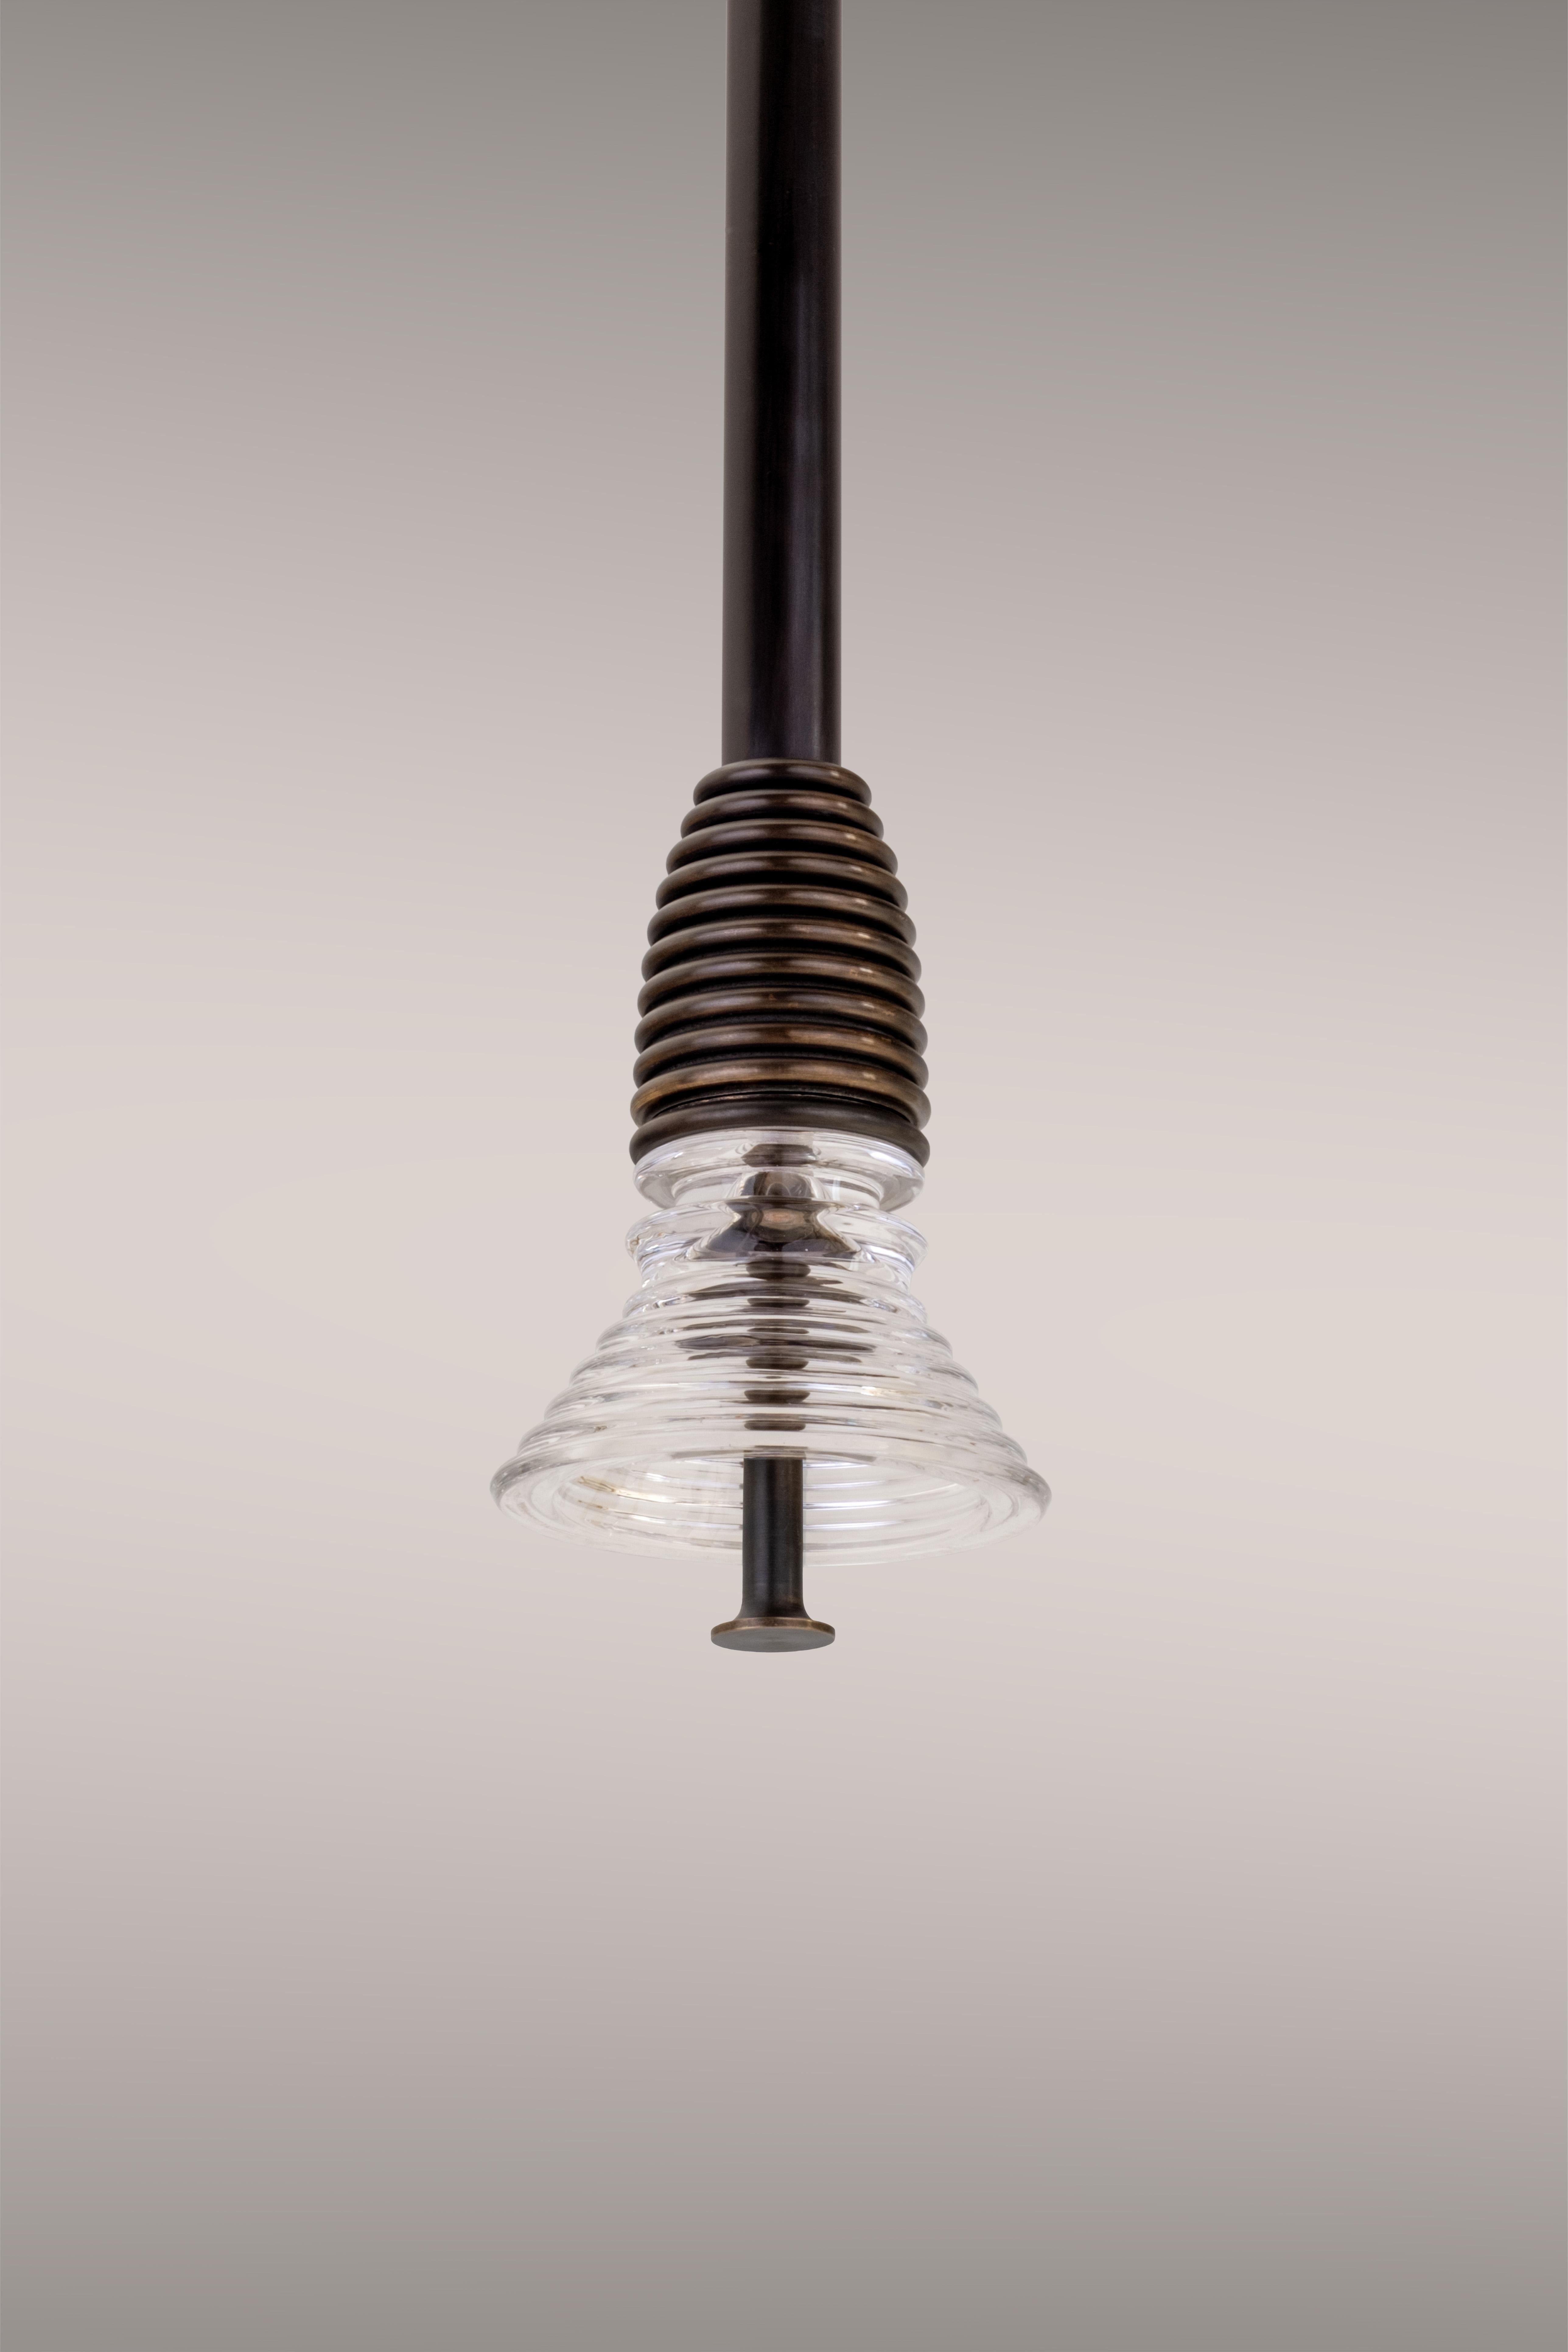 The Insulator 'A' Pendant in dark brass and clear glass by NOVOCASTRIAN deco For Sale